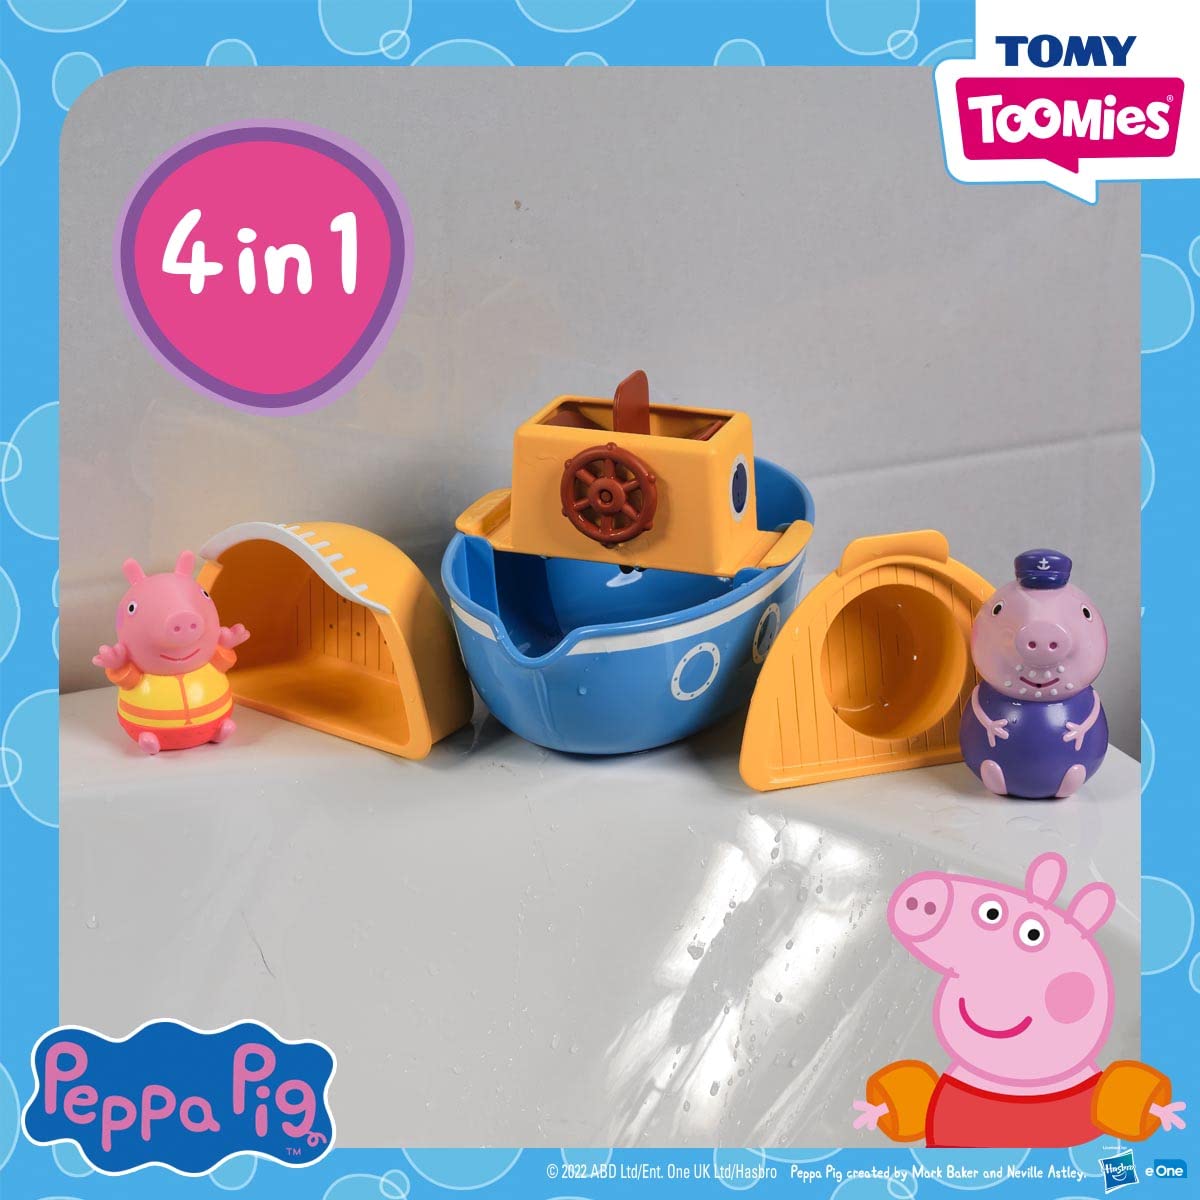 Tomy E73414 Grandpa Pig’s Splash & Pour Boat from Toomies – 4-in-1 Bath Time Peppa Pig Toy with Removable Water Sprinklers and Spinning Paddle Wheelhouse